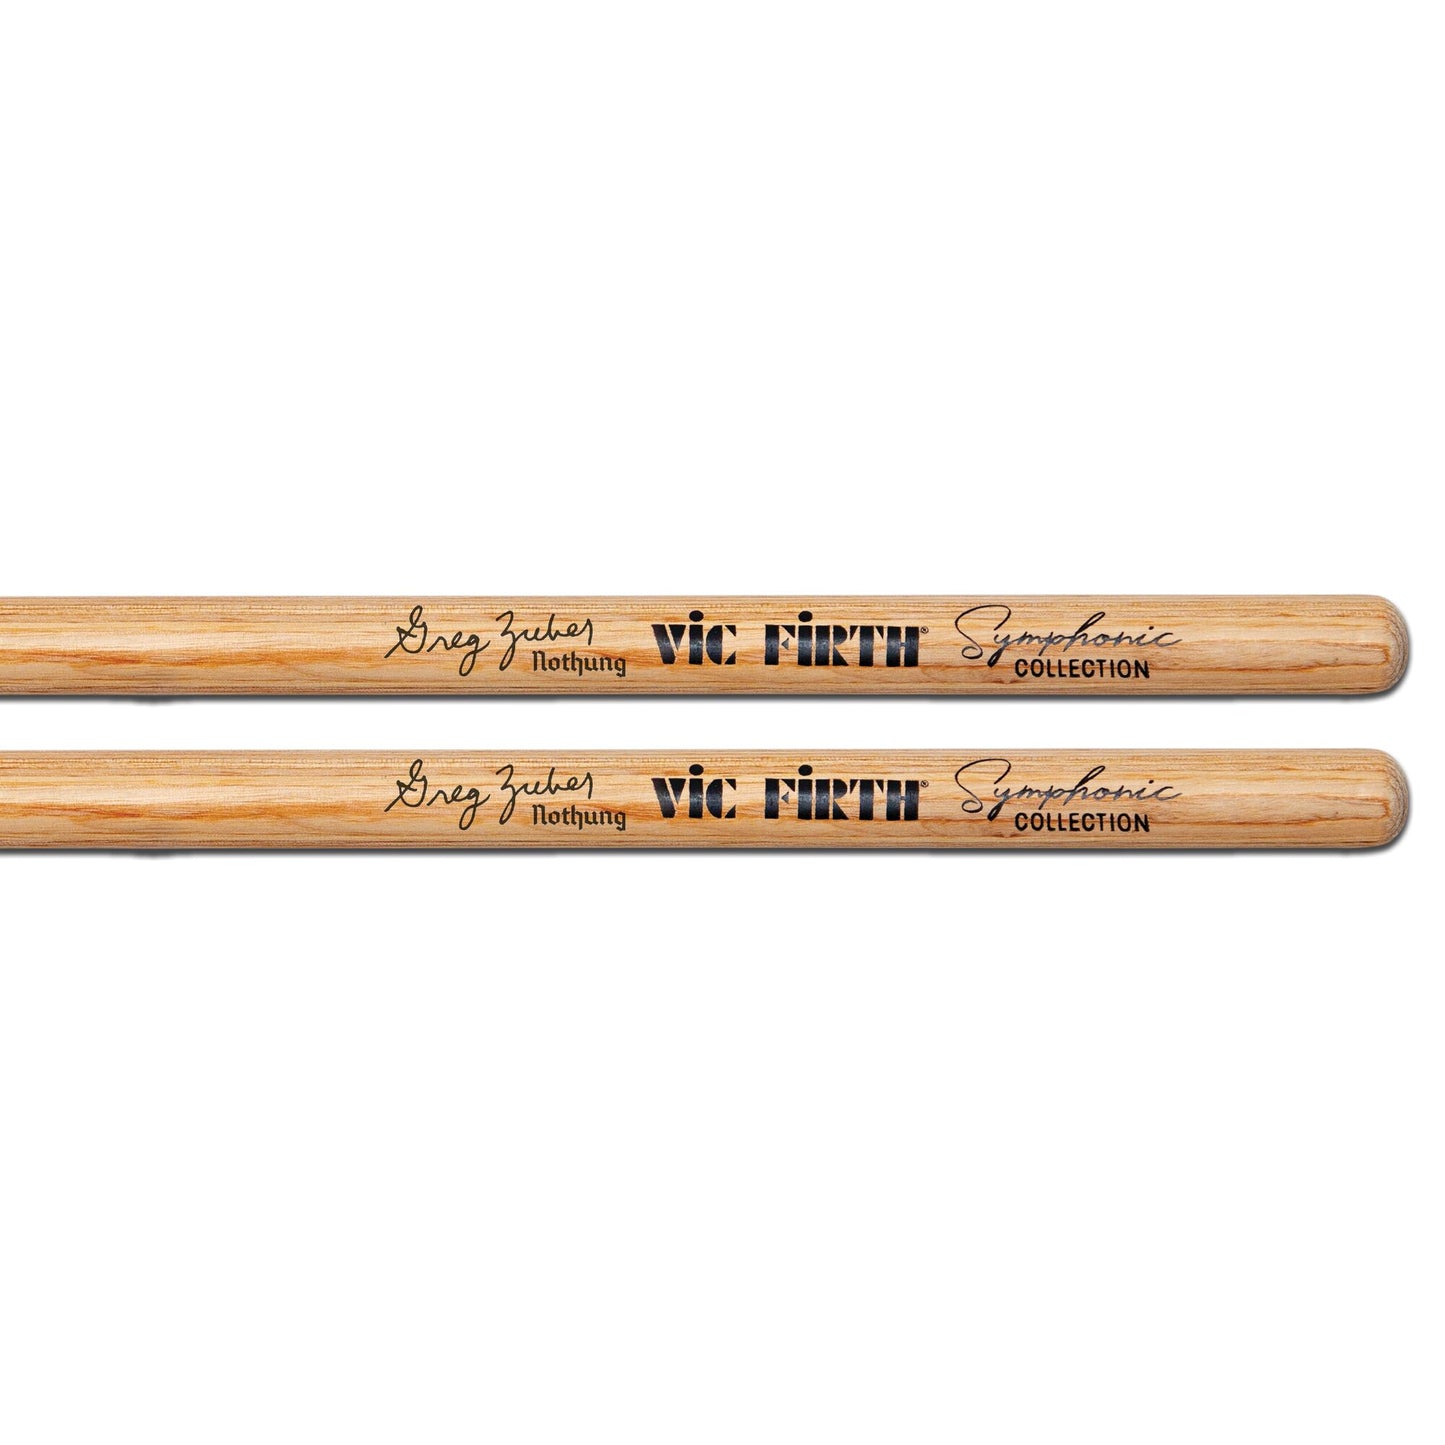 Symphonic Collection -- Greg Zuber Nothung Drumsticks